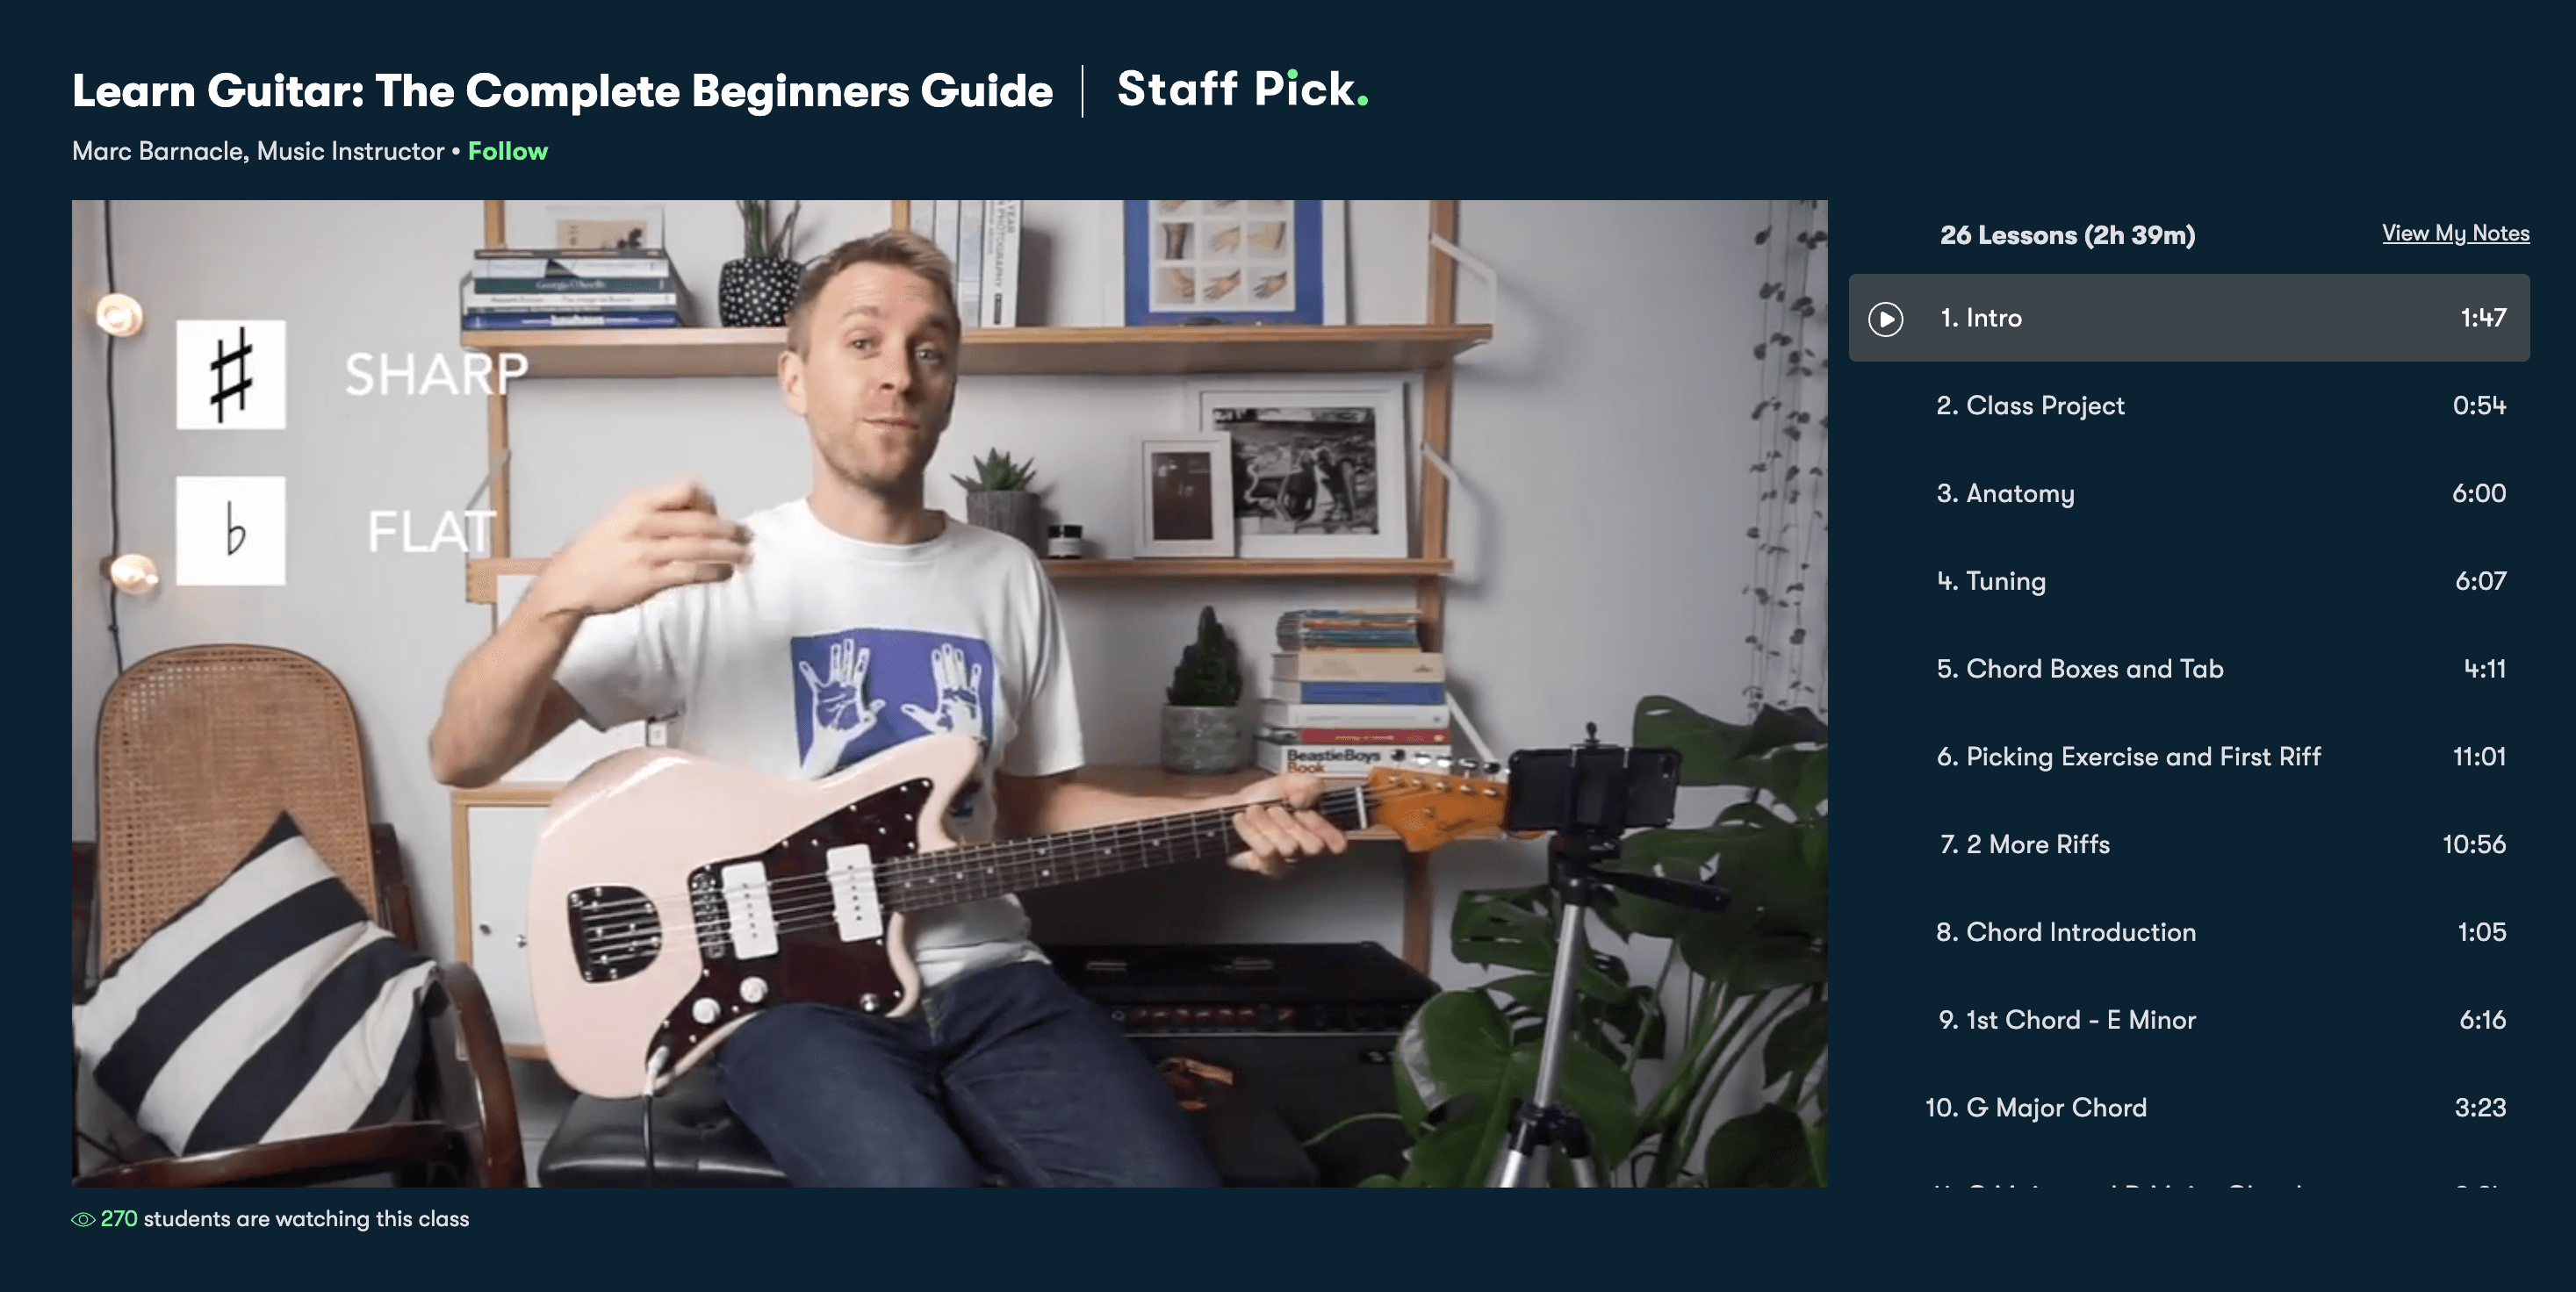 A still from the Skillshare course 'Learn Guitar: The Complete Beginners Guide'